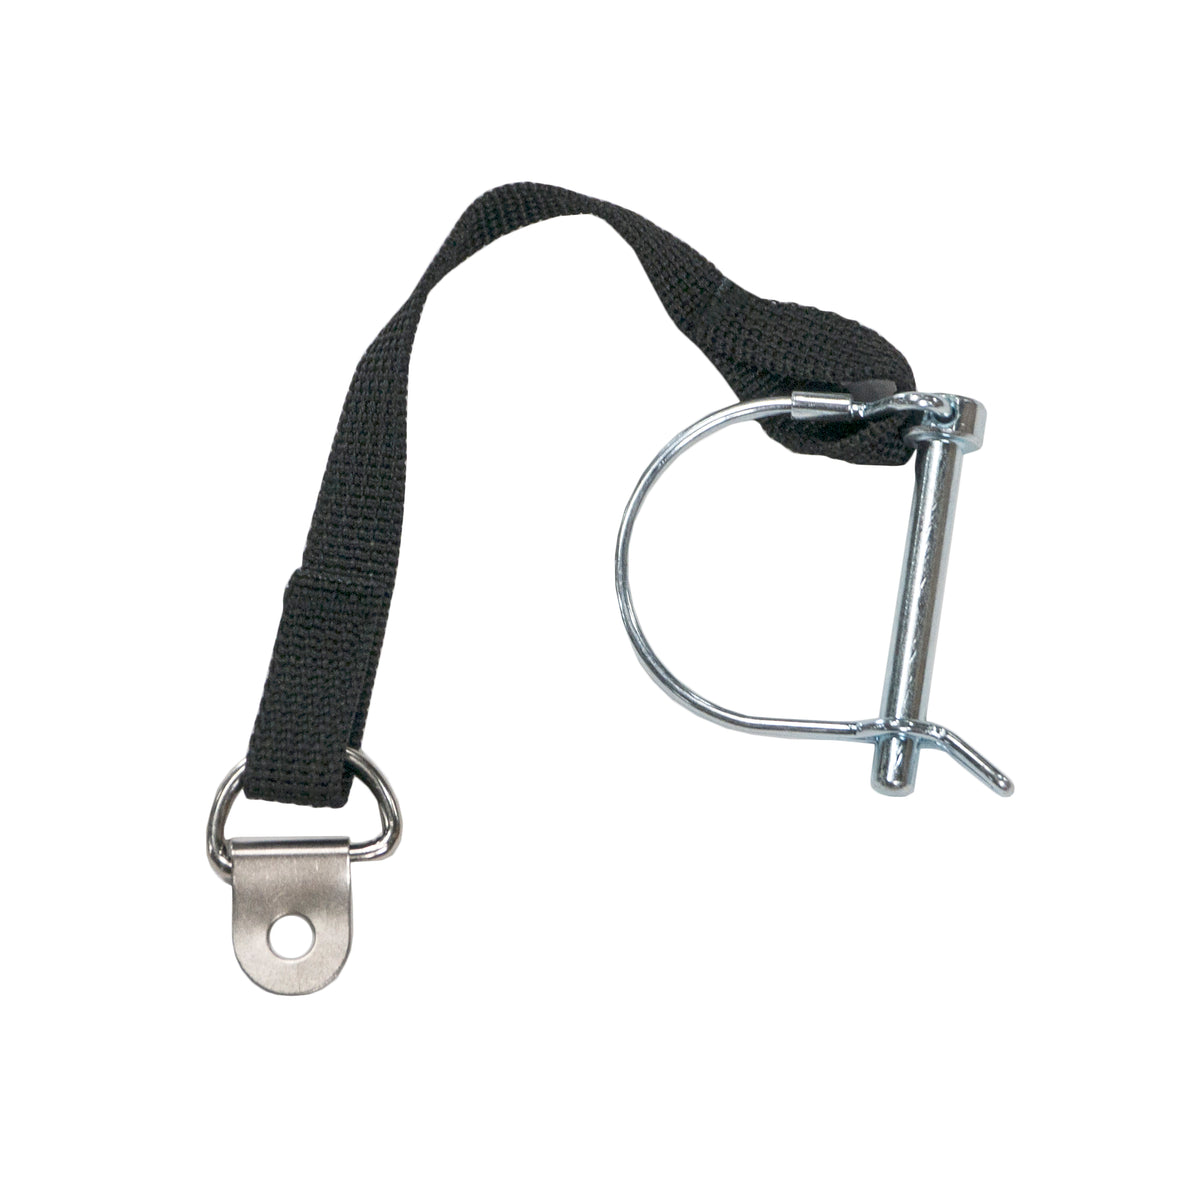 Tow Bar Receiver Strap w/ Hitch Pin and Retainer